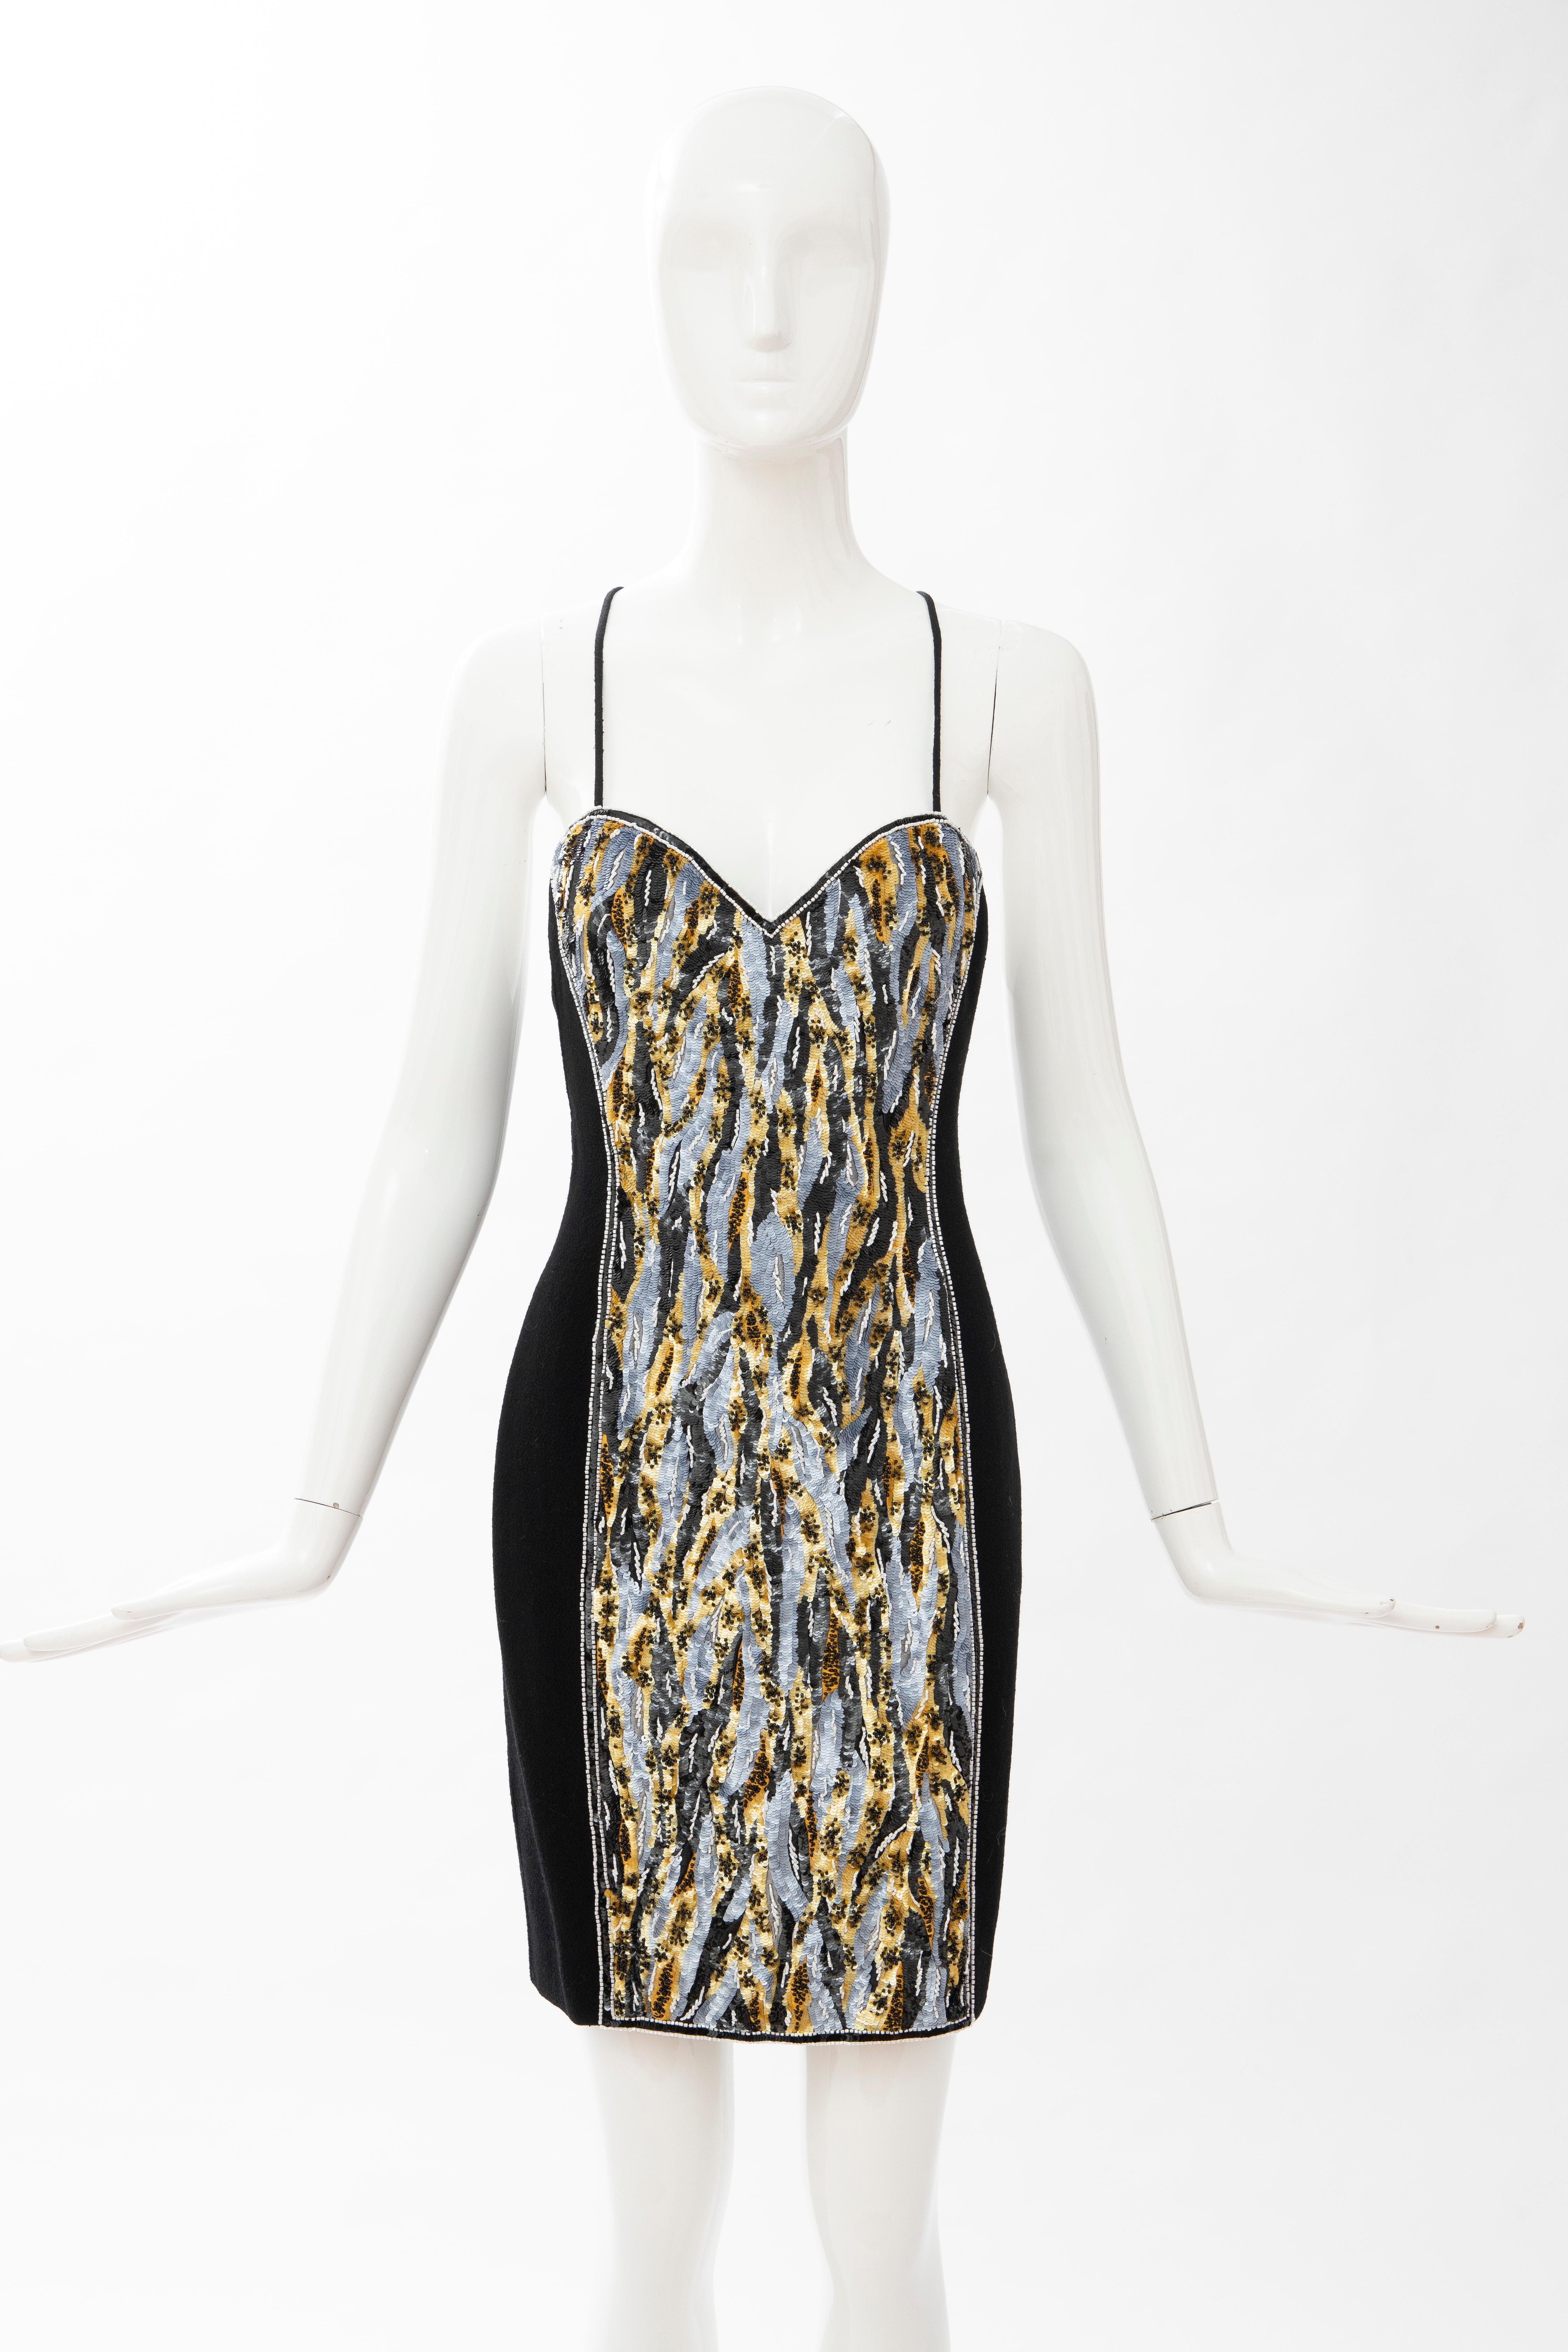 Geoffrey Beene, Circa: 1990's black wool crepe embroidered sequins dress ensemble.

The black wool crepe evening dress with embroidered white beads and black, gold, grey round sequins, back criss-cross spaghetti straps, silk interior front printed